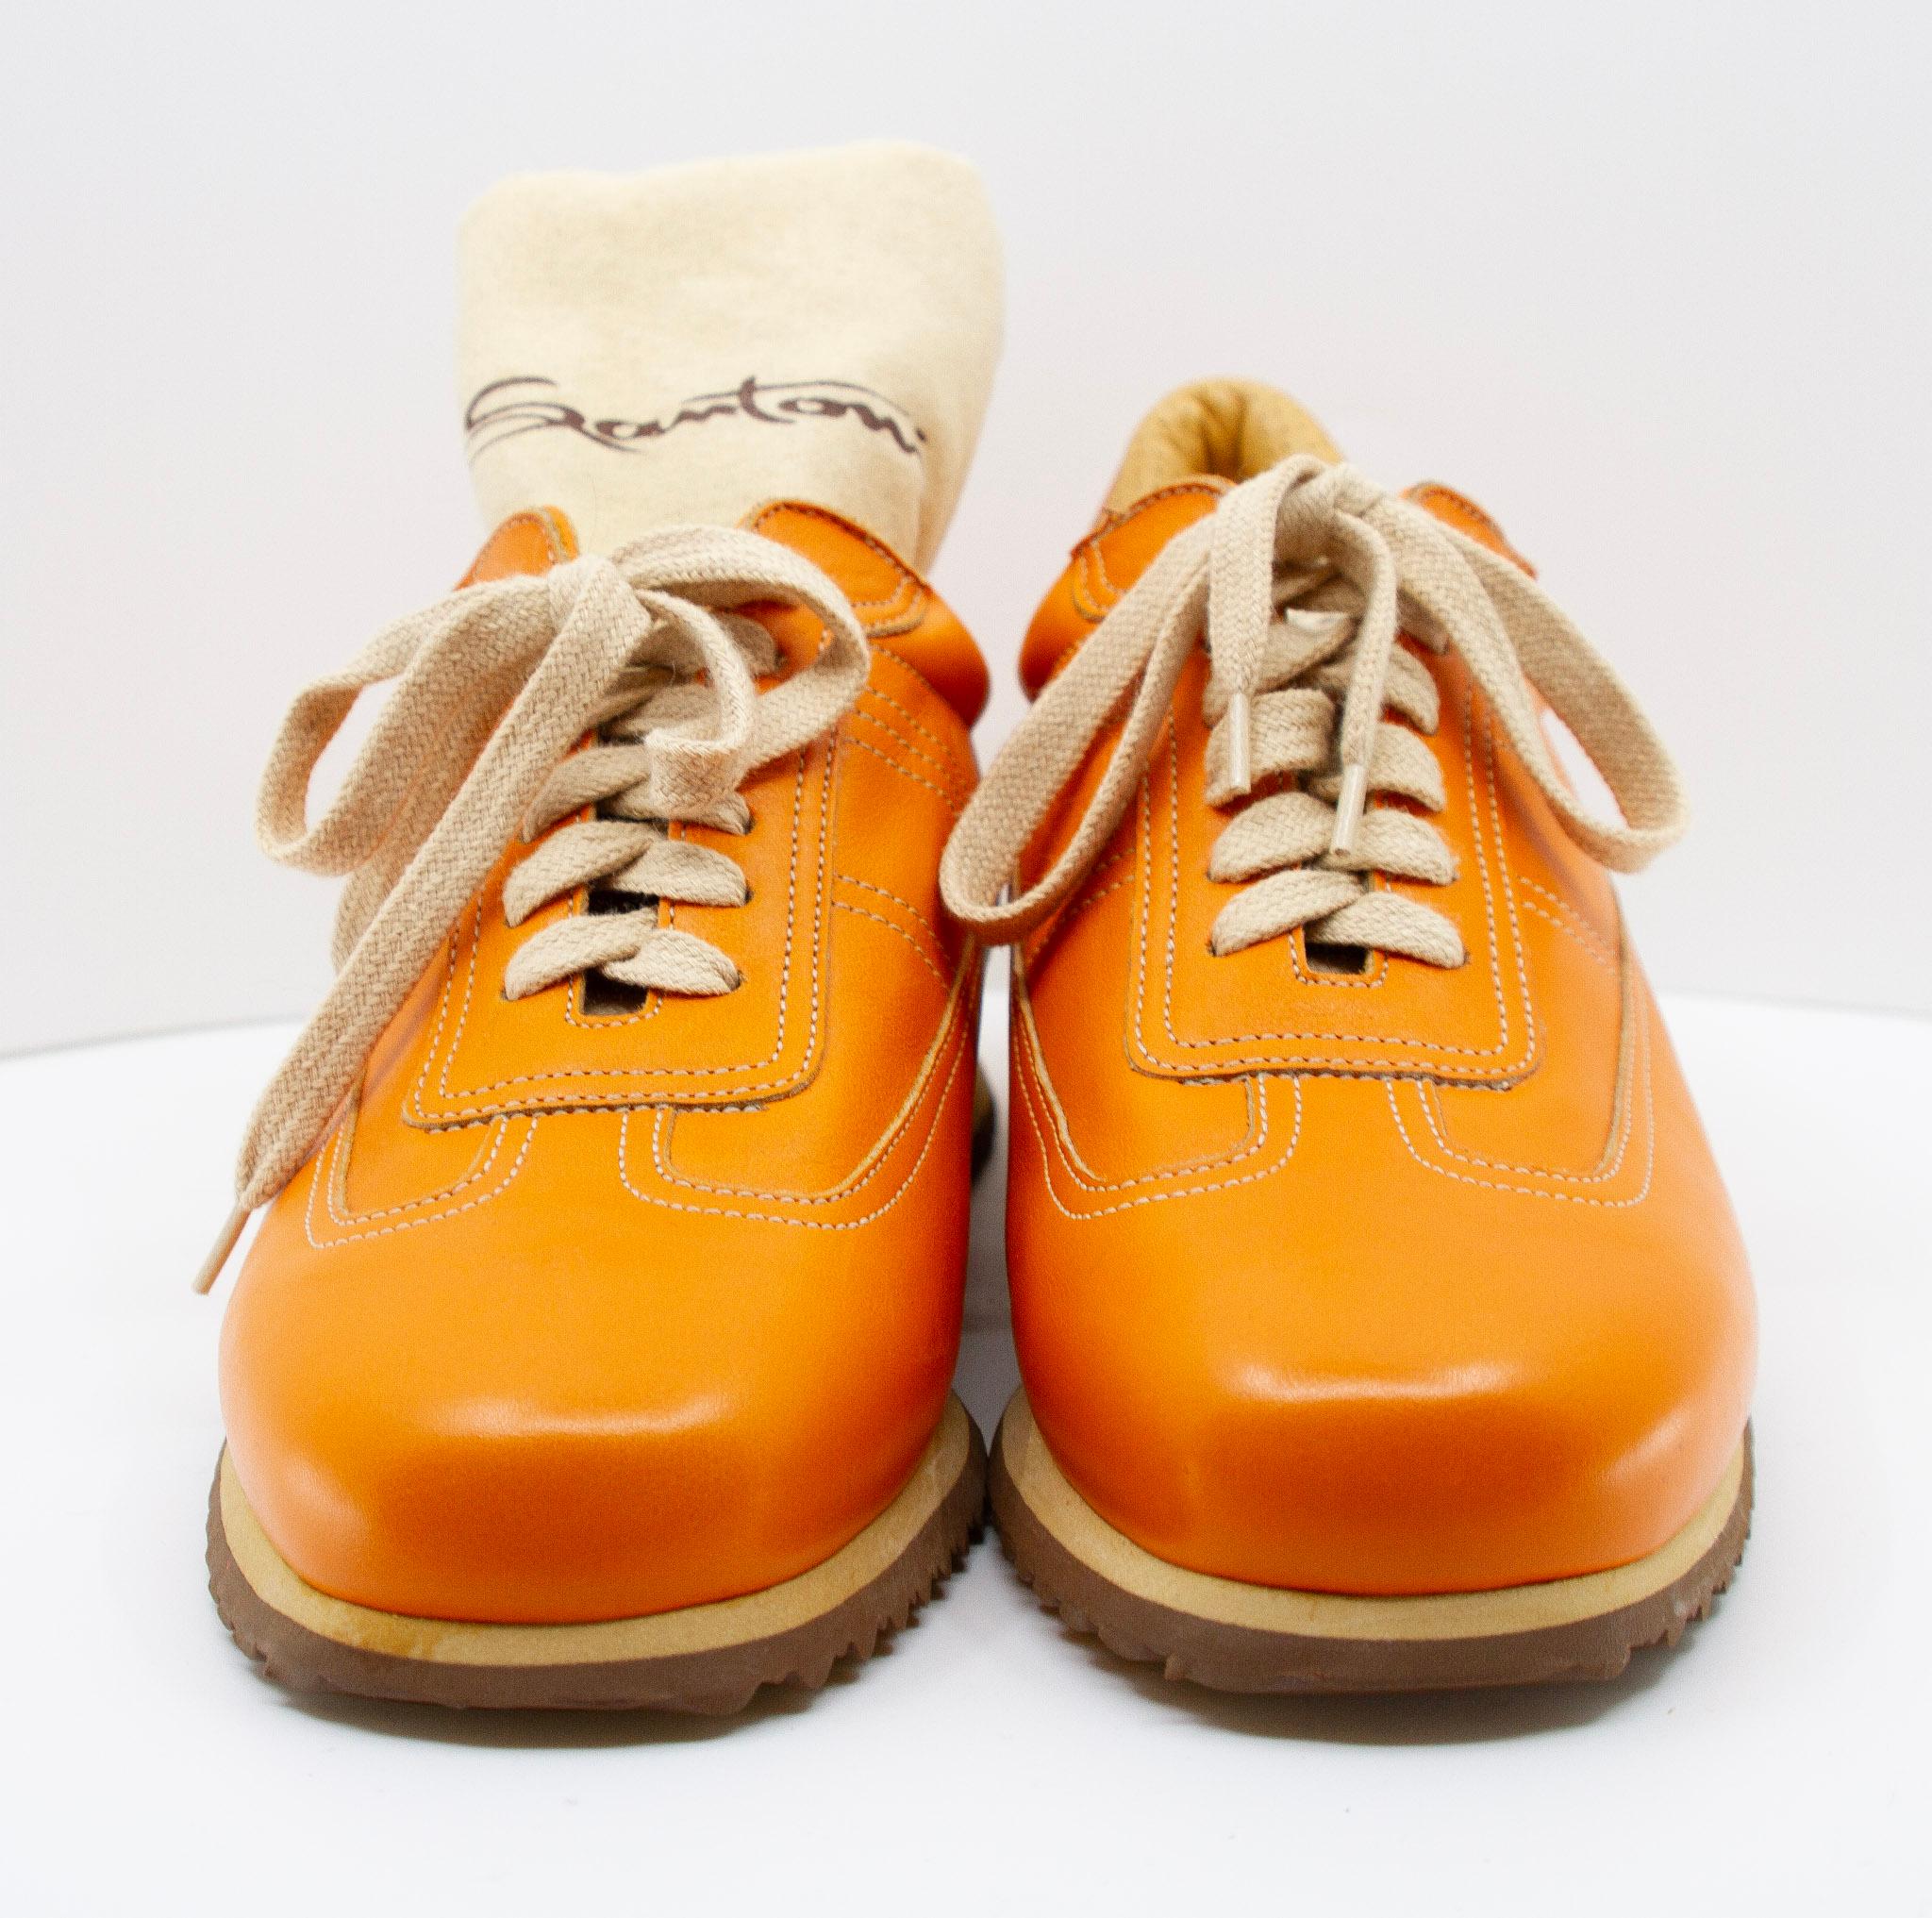  Santoni orange leather sneakers, in a size 35. These Italian made sneakers feature orange leather uppers, rounded toes, contrast stitching, off-white laces, leather insoles and cream and brown outsoles. Two Santoni drawstring dust covers are also